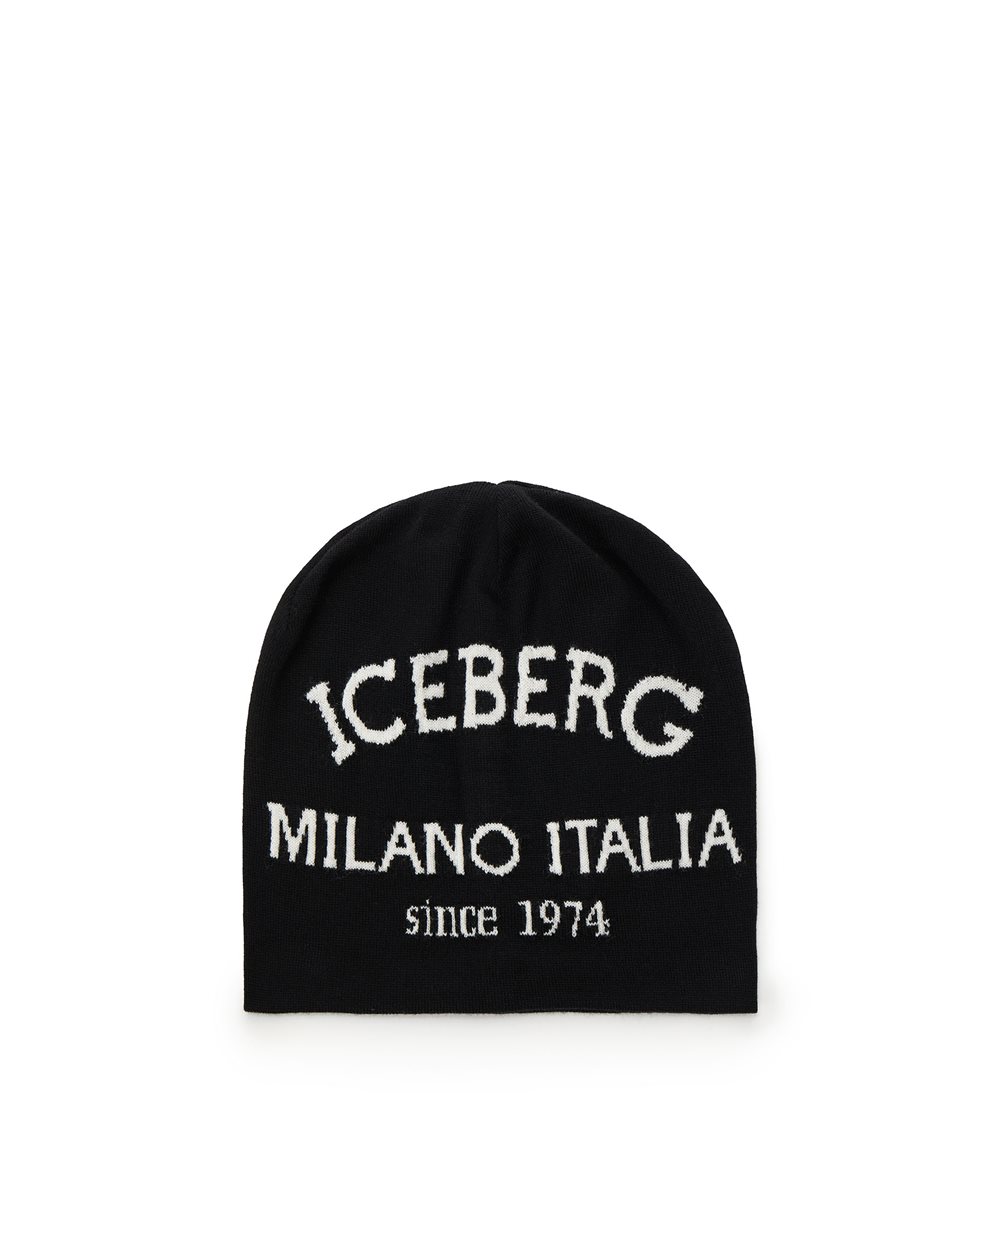 Wool beanie with logo -  ( SECONDO STEP US )  PROMO UP TO 50%  | Iceberg - Official Website